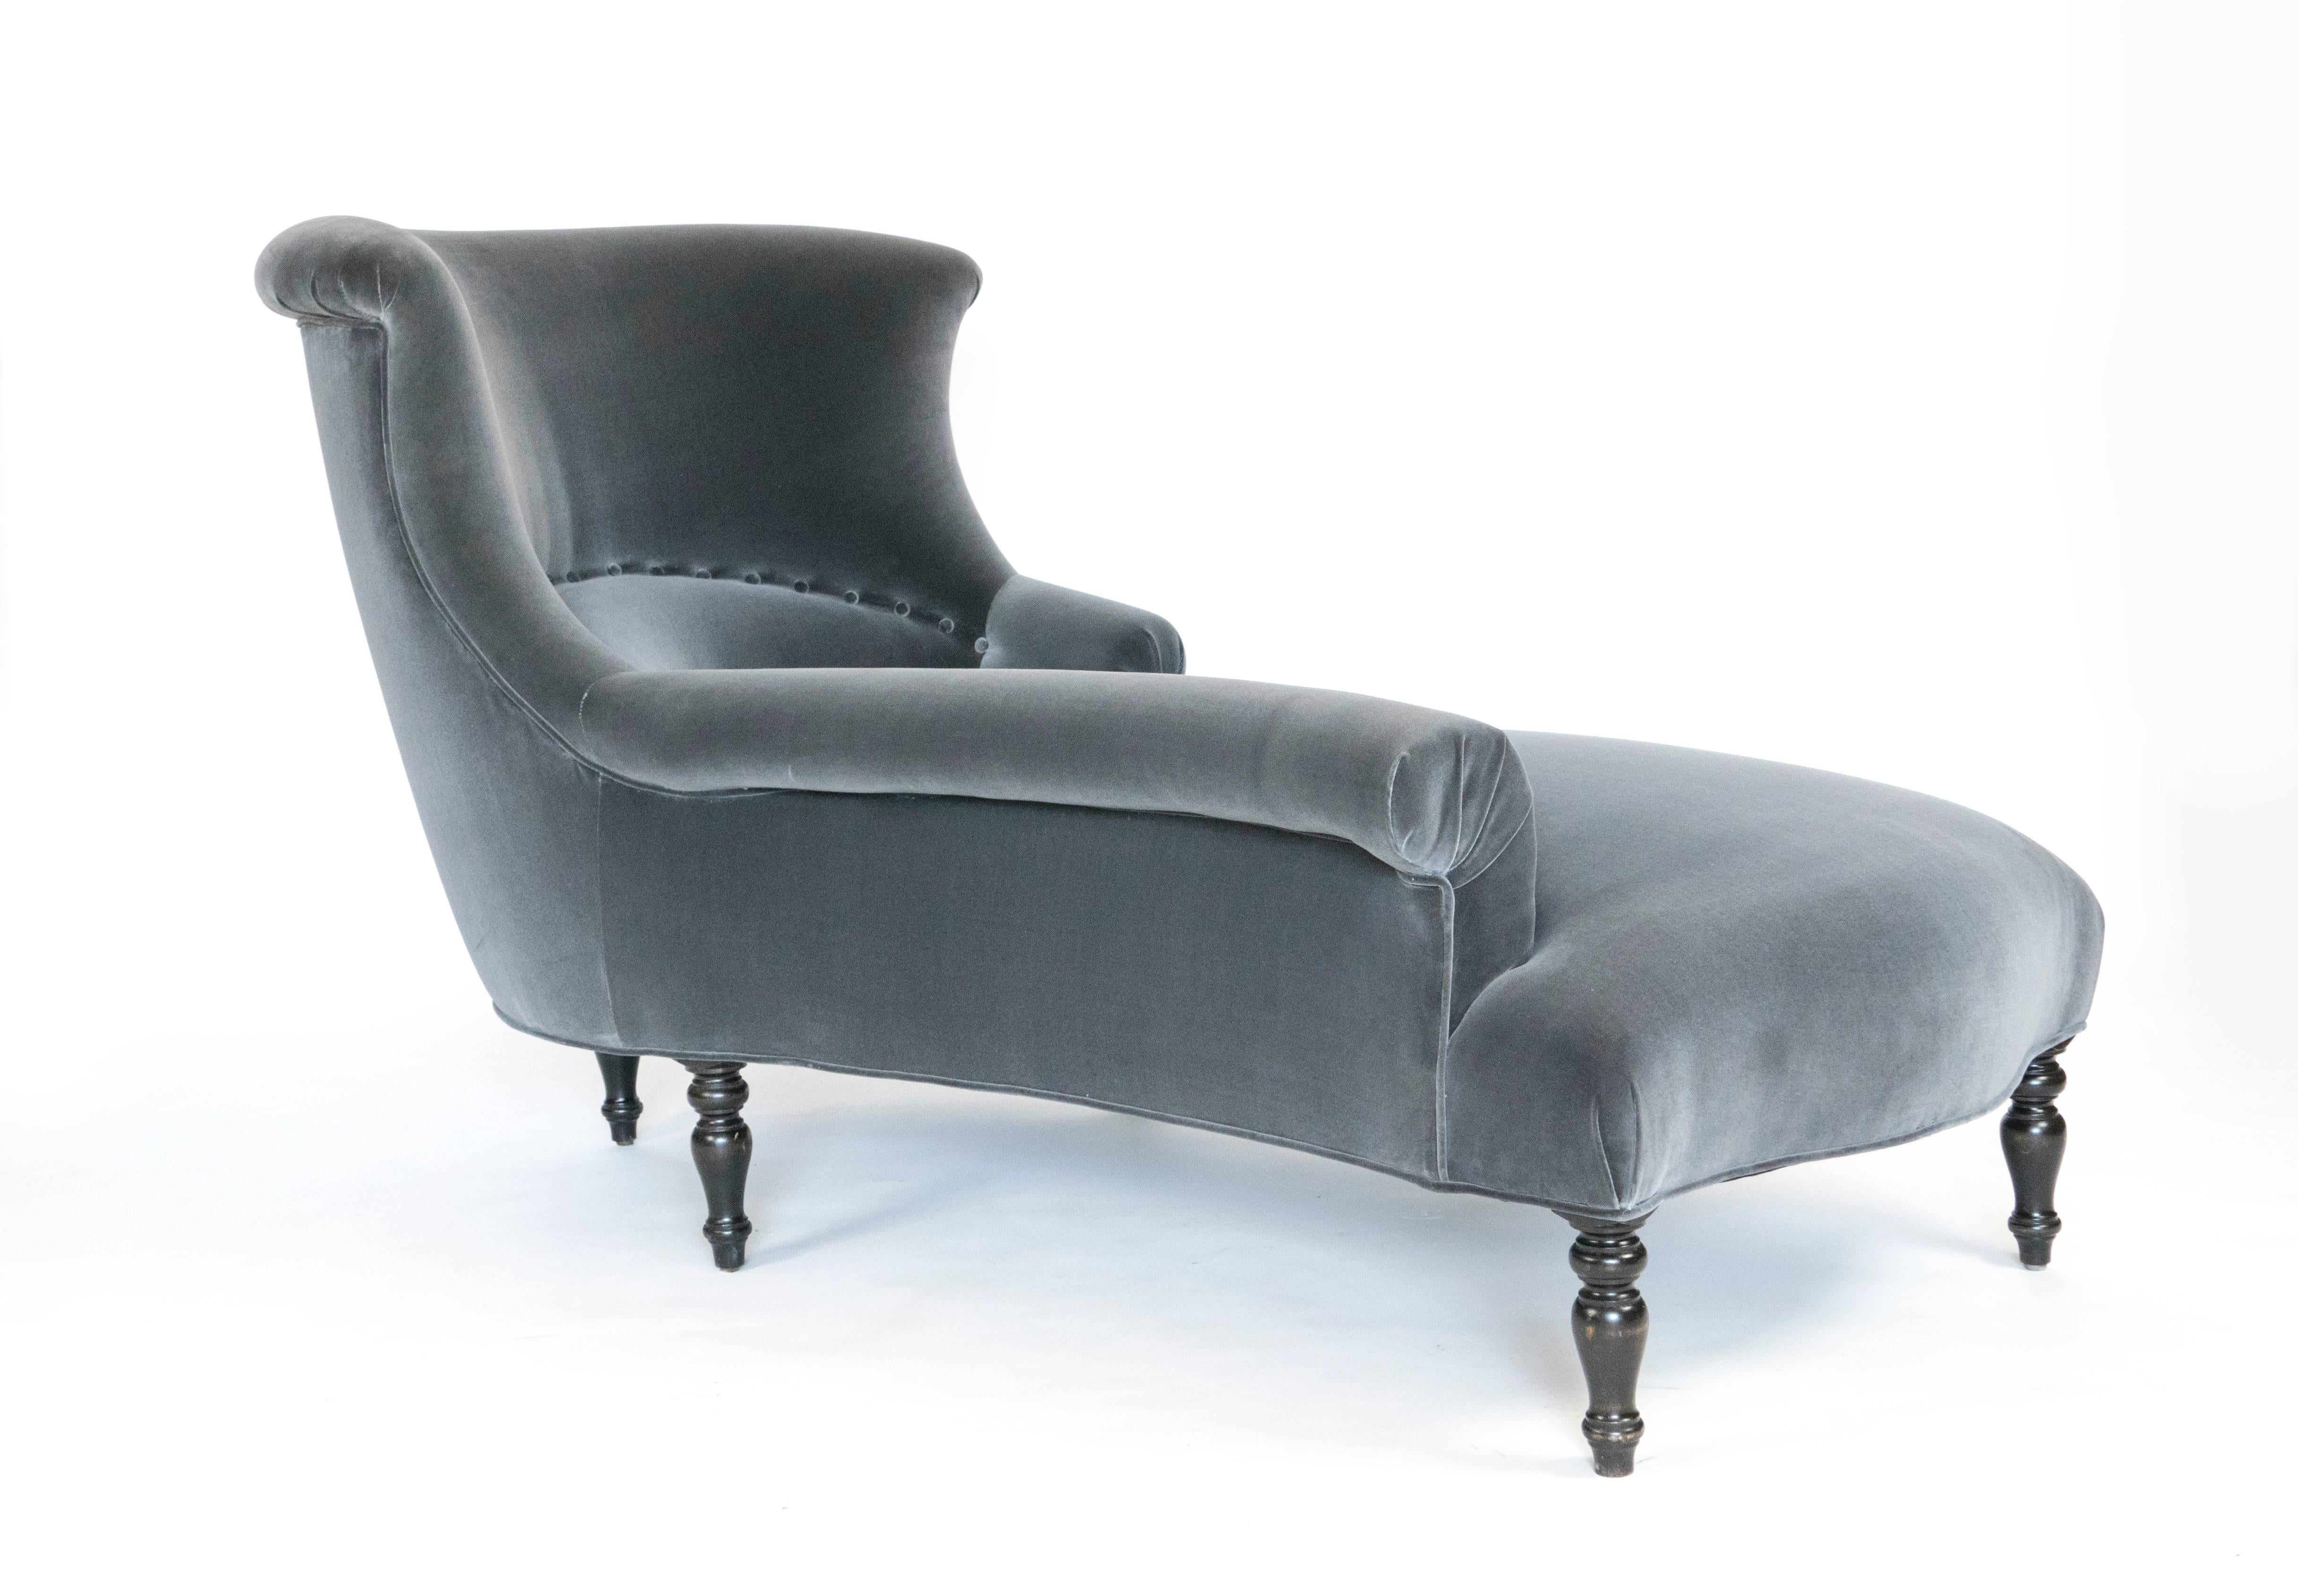 Our Classic Garonne chaise longue has five Napoleon III style turned wooden legs.
From every angle, you see its distinctive elegant curved lines. This piece is
perfect for cuddling up with a good book in front of the fireplace or simply lounging